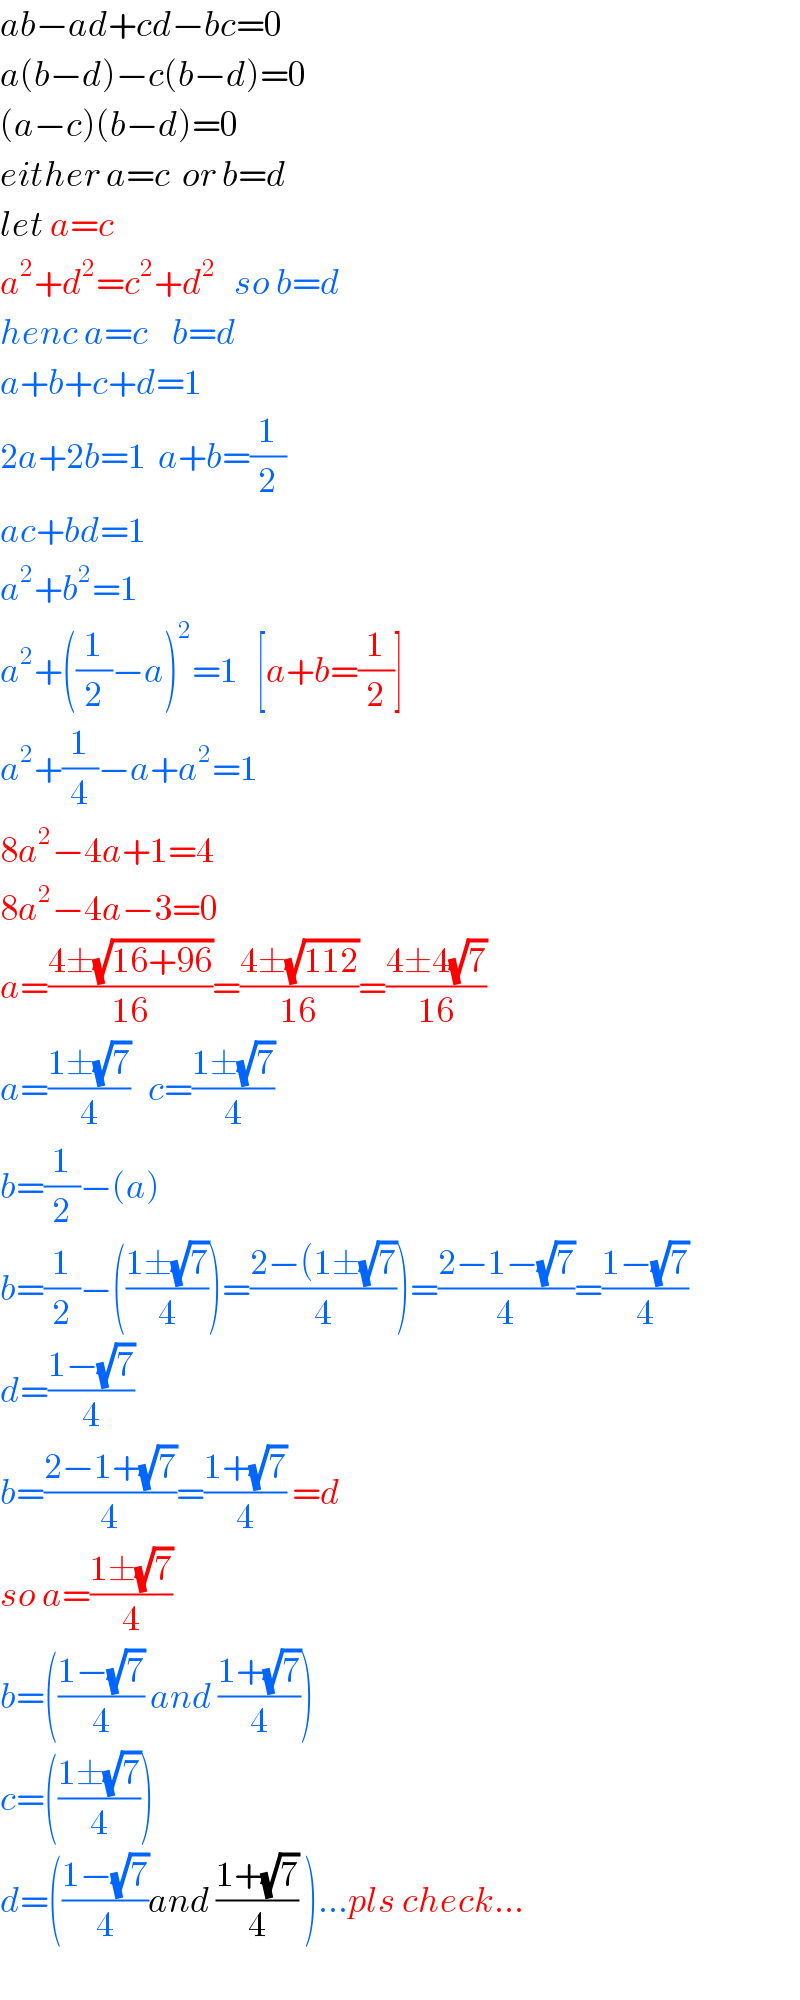 ab−ad+cd−bc=0  a(b−d)−c(b−d)=0  (a−c)(b−d)=0  either a=c  or b=d  let a=c  a^2 +d^2 =c^2 +d^2    so b=d  henc a=c    b=d  a+b+c+d=1  2a+2b=1  a+b=(1/2)  ac+bd=1  a^2 +b^2 =1  a^2 +((1/2)−a)^2 =1   [a+b=(1/2)]  a^2 +(1/4)−a+a^2 =1  8a^2 −4a+1=4  8a^2 −4a−3=0  a=((4±(√(16+96)))/(16))=((4±(√(112)))/(16))=((4±4(√7))/(16))  a=((1±(√7))/4)   c=((1±(√7))/4)  b=(1/2)−(a)  b=(1/2)−(((1±(√7))/4))=((2−(1±(√7))/4))=((2−1−(√7))/4)=((1−(√7))/4)  d=((1−(√7))/4)  b=((2−1+(√7))/4)=((1+(√7))/4) =d  so a=((1±(√7))/4)  b=(((1−(√7))/4) and ((1+(√7))/4))  c=(((1±(√7))/4))  d=(((1−(√7))/4)and ((1+(√7))/4) )...pls check...  